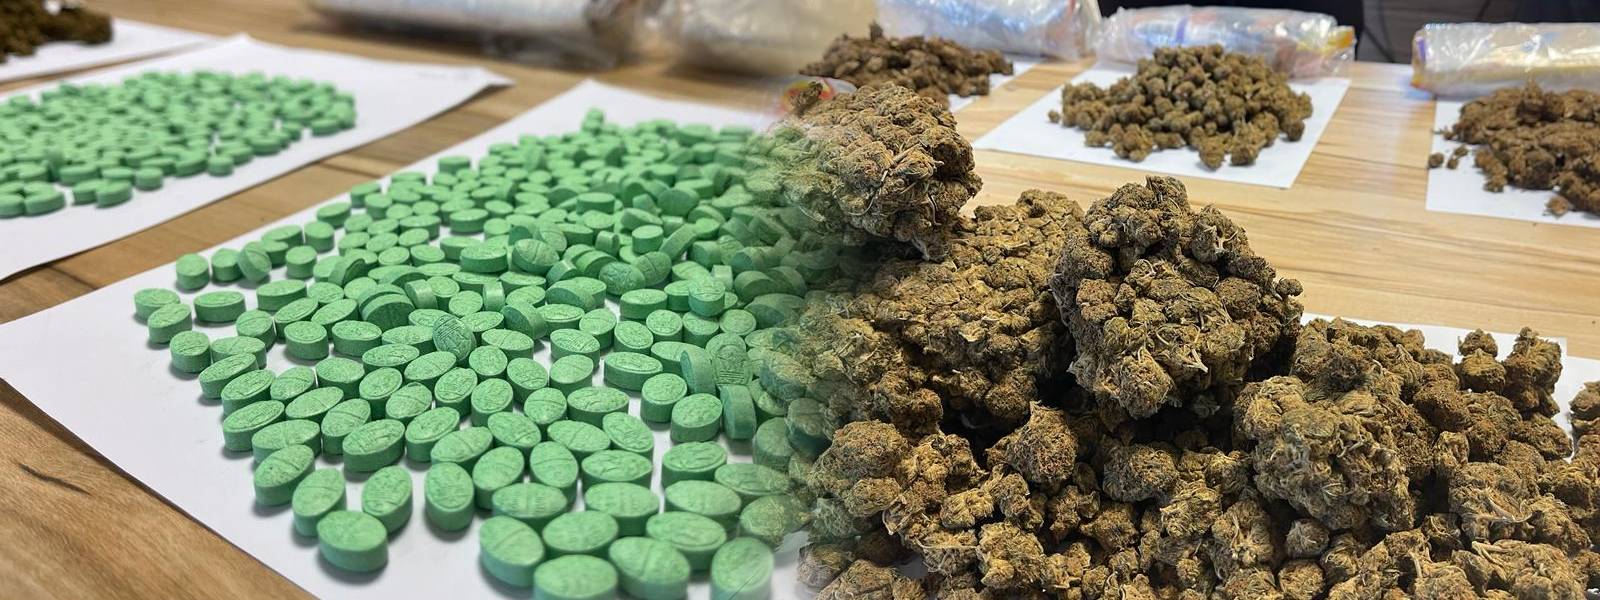 Kush and ecstasy worth Rs. 32Mn seized by Customs